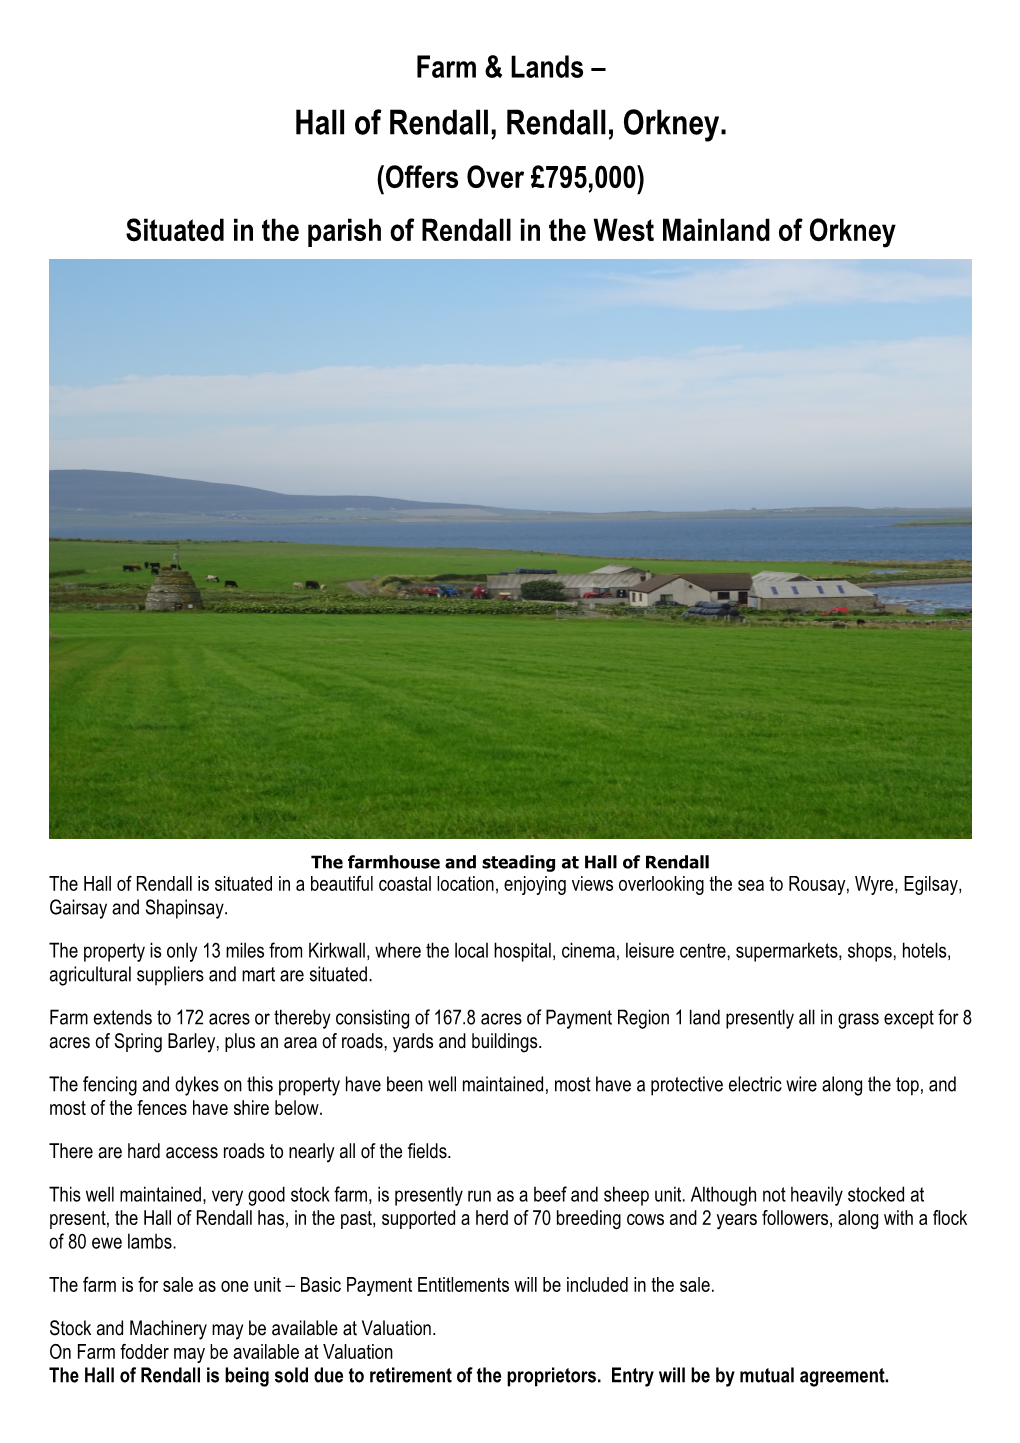 Hall of Rendall, Rendall, Orkney